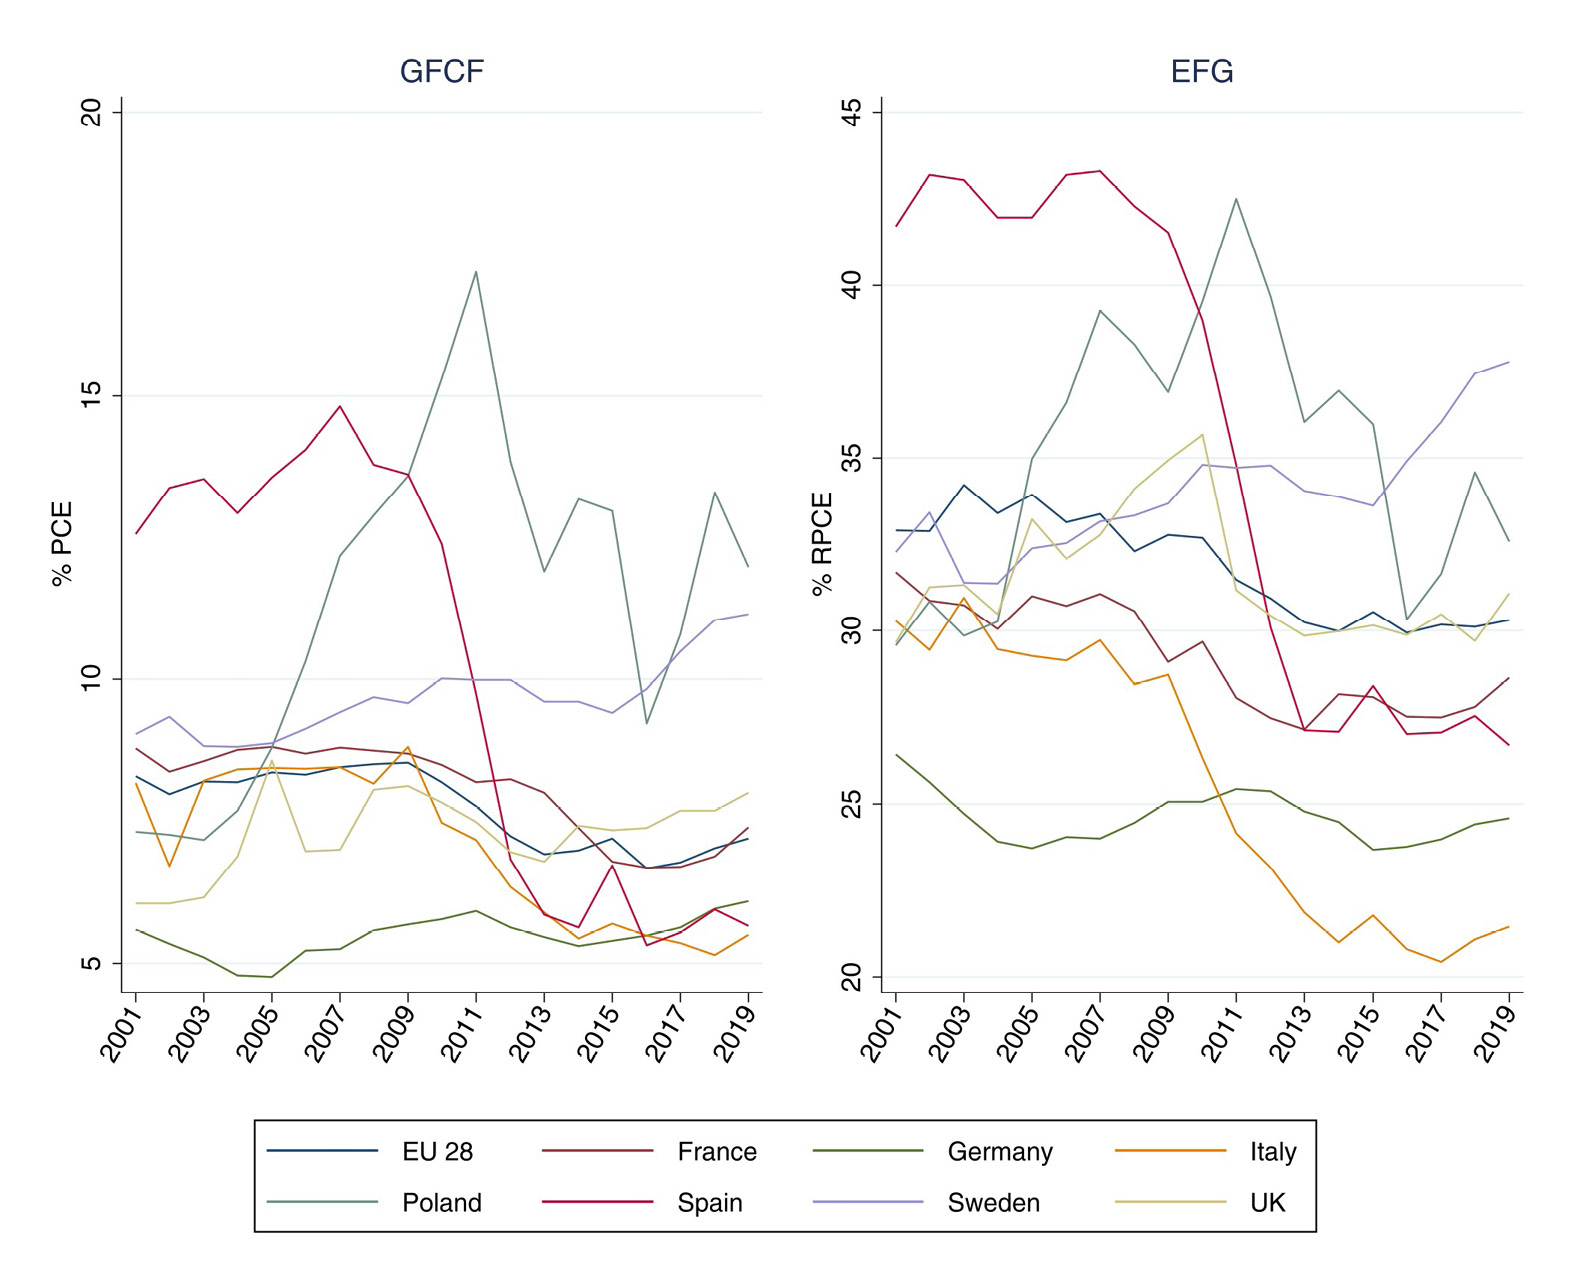 Line chart showing the trend of GFCF and EFG in percentage of RPCE and PCE between 2001 and 2019. The graph on the left shows the trend of GFCF as a percentage of PCE, the graph on the right shows the trend of EFG as a percentage of RPCE